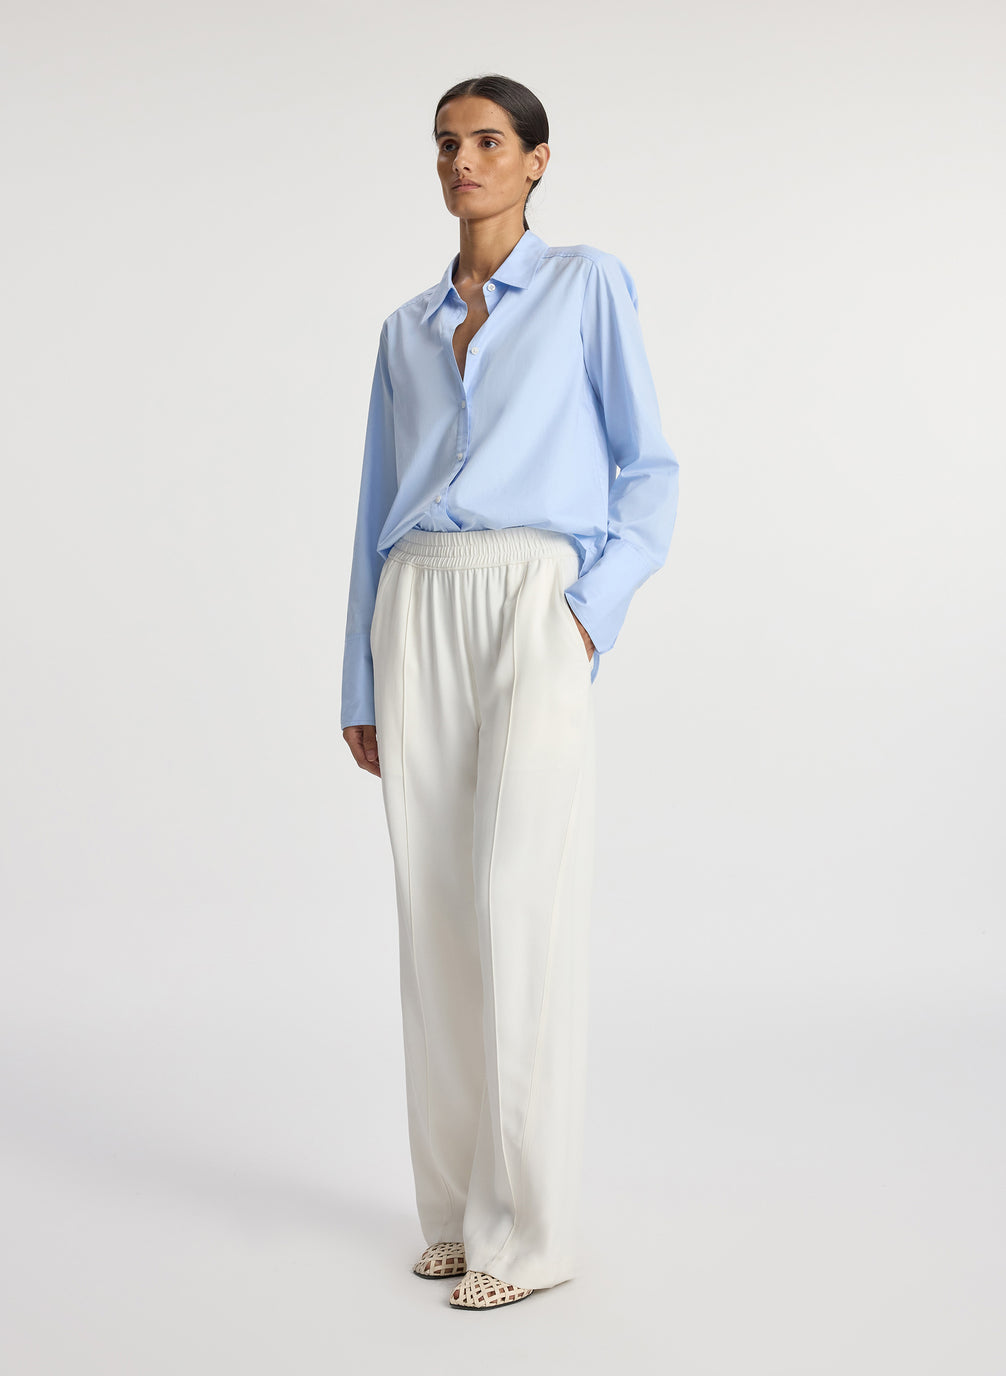 side view of woman wearing light blue button down collared shirt and white pants